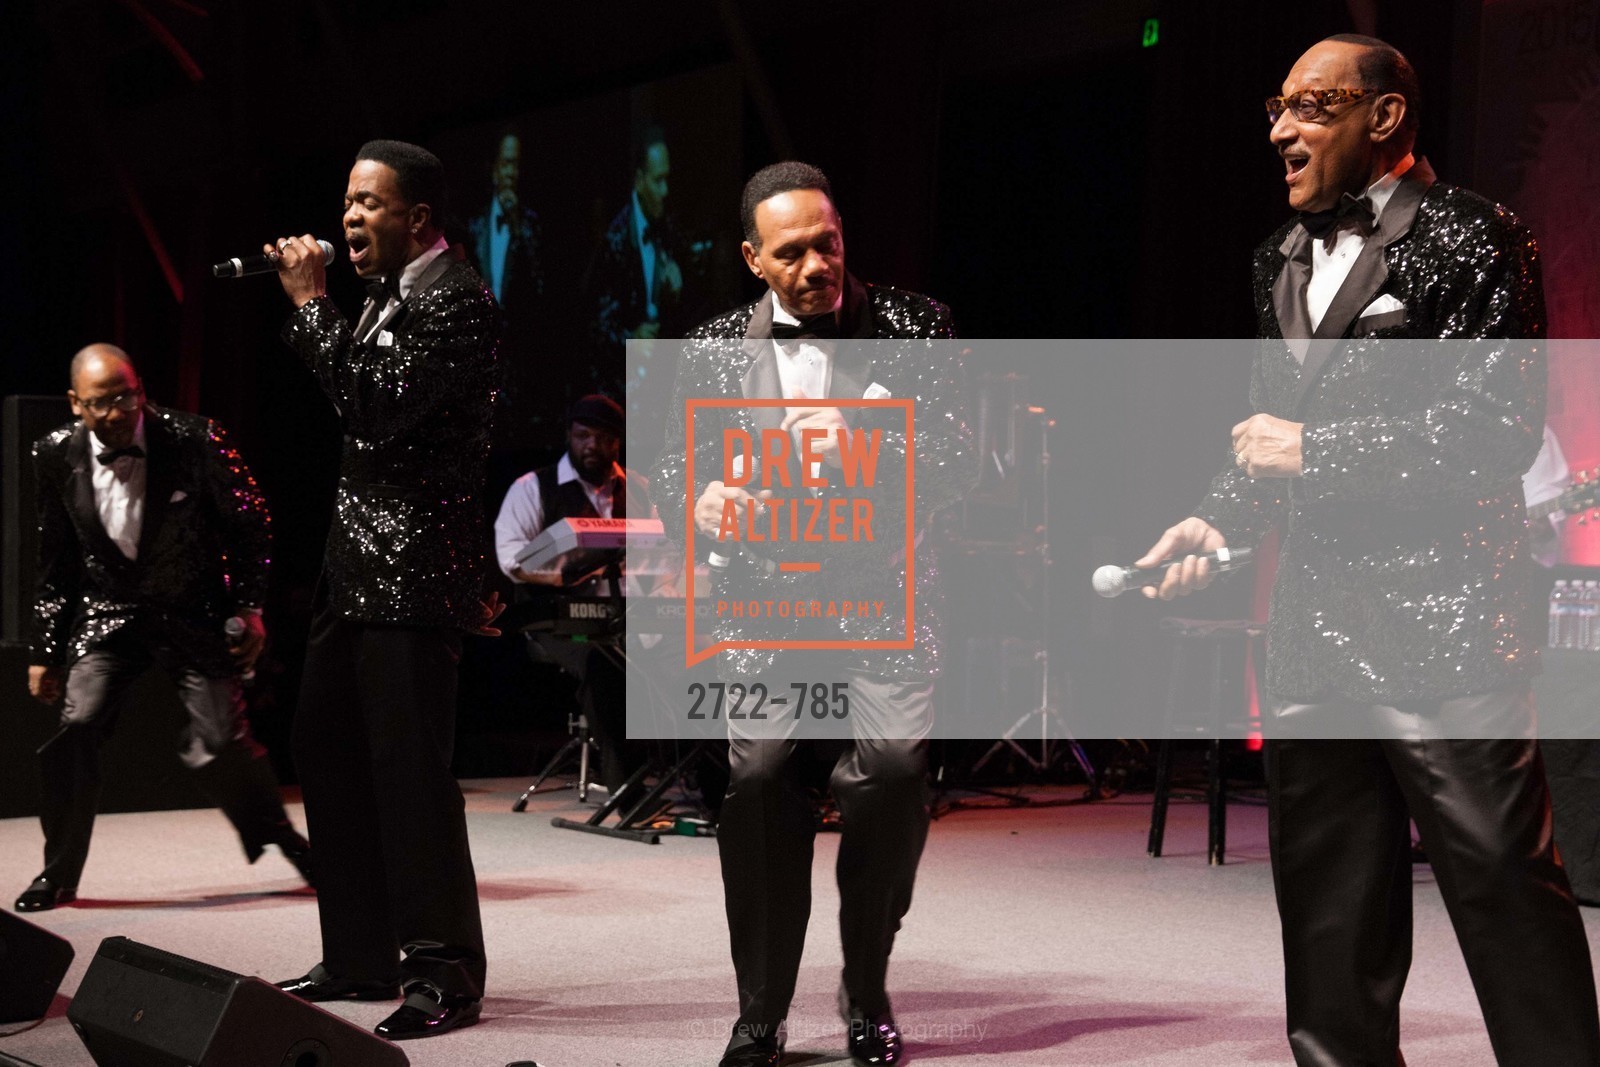 Performance By The Four Tops, Photo #2722-785